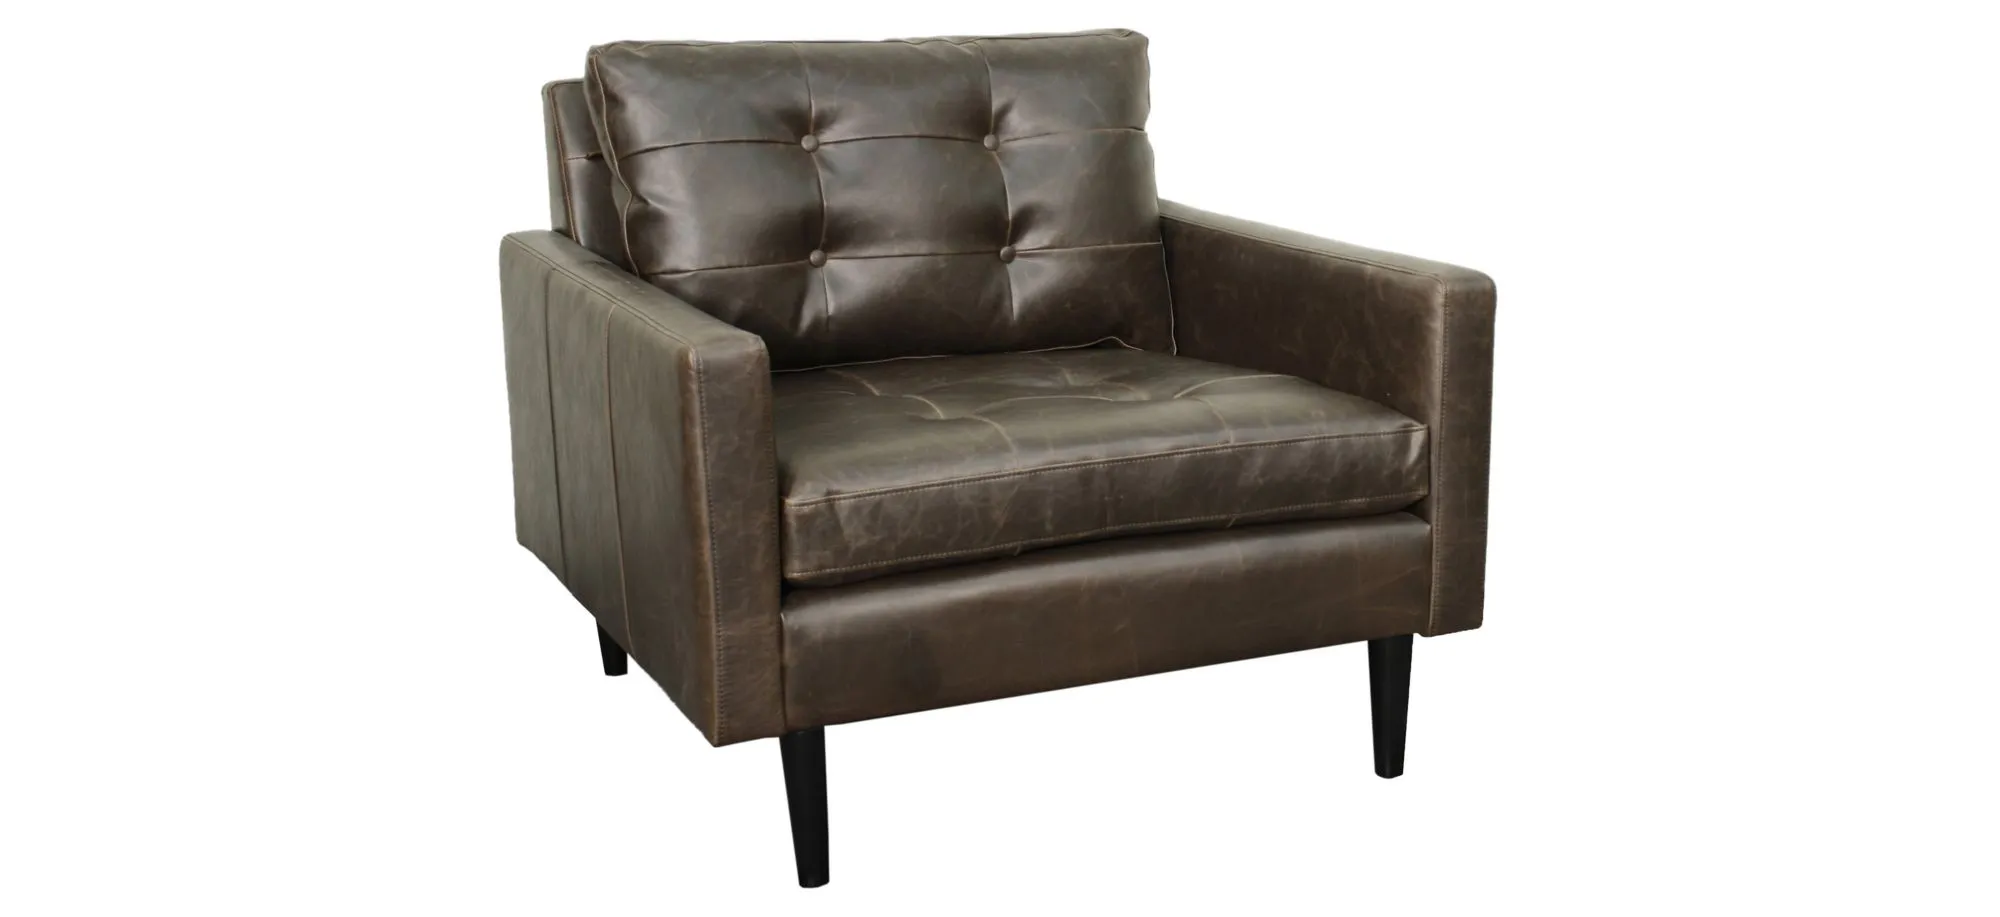 Ritchie Leather Chair in Vintage Dark Brown by New Pacific Direct